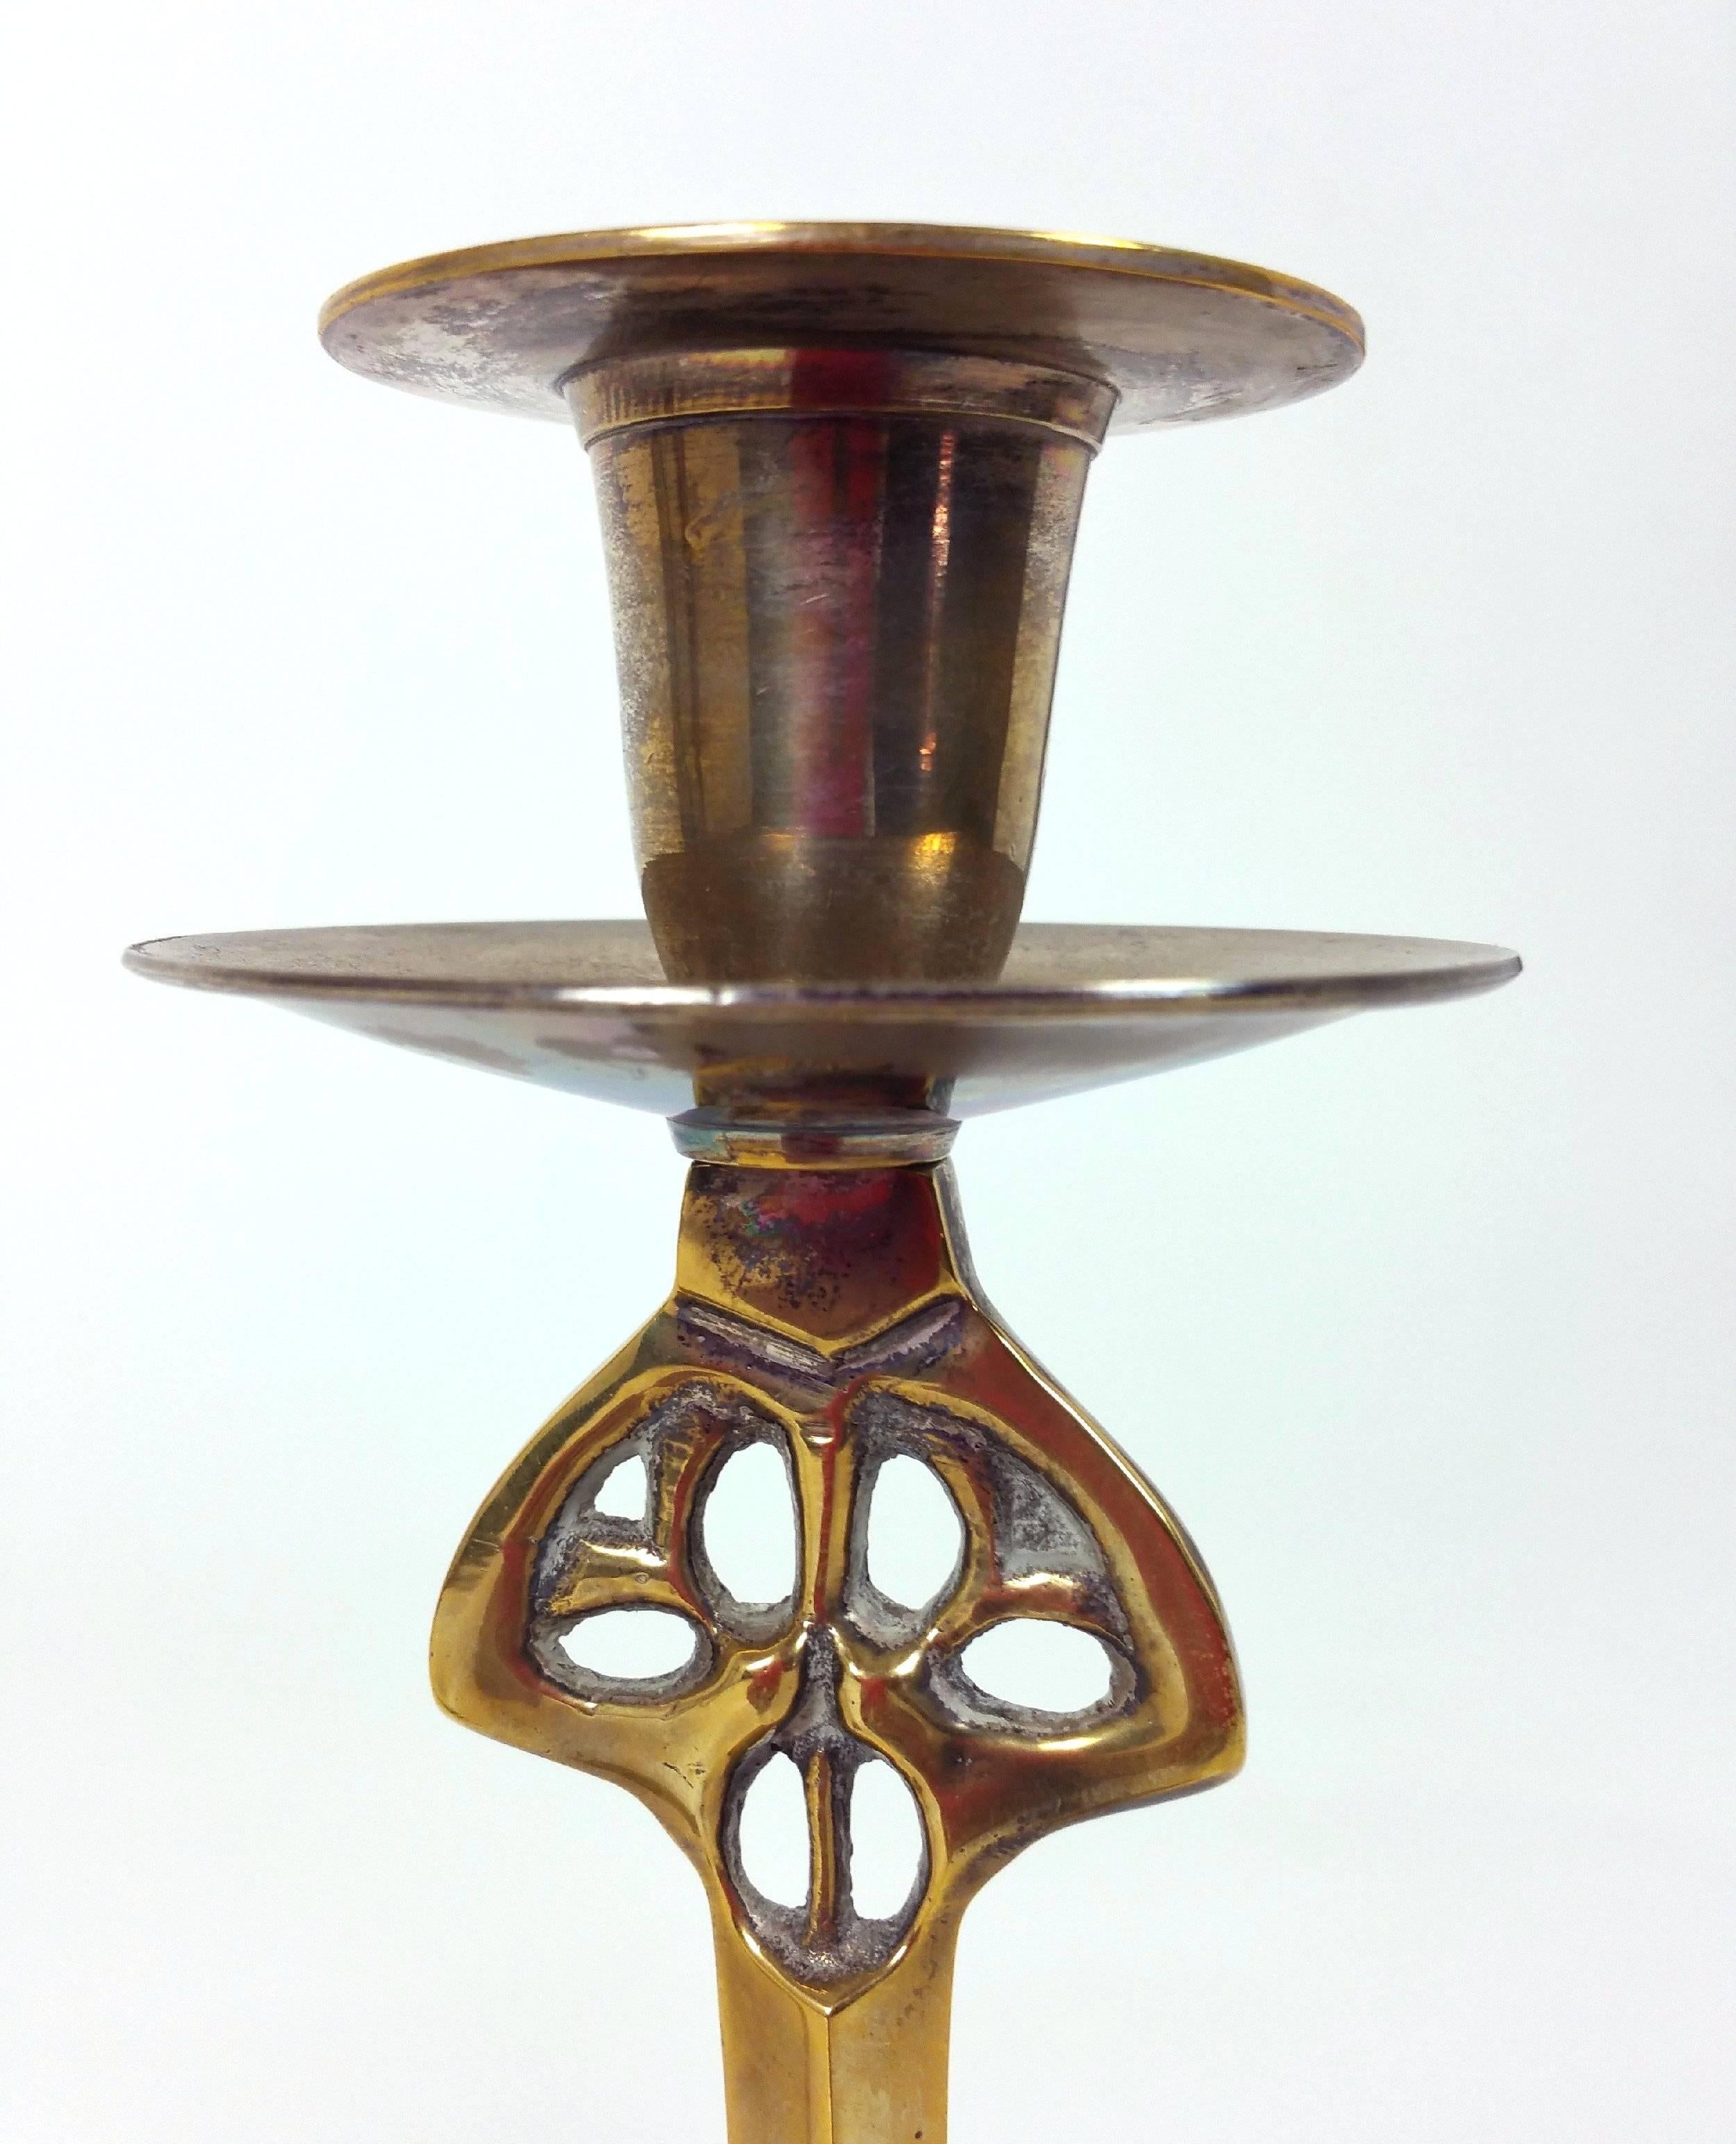 Great Britain (UK) Pair of Art Nouveau 19th Century Brass Candlesticks For Sale